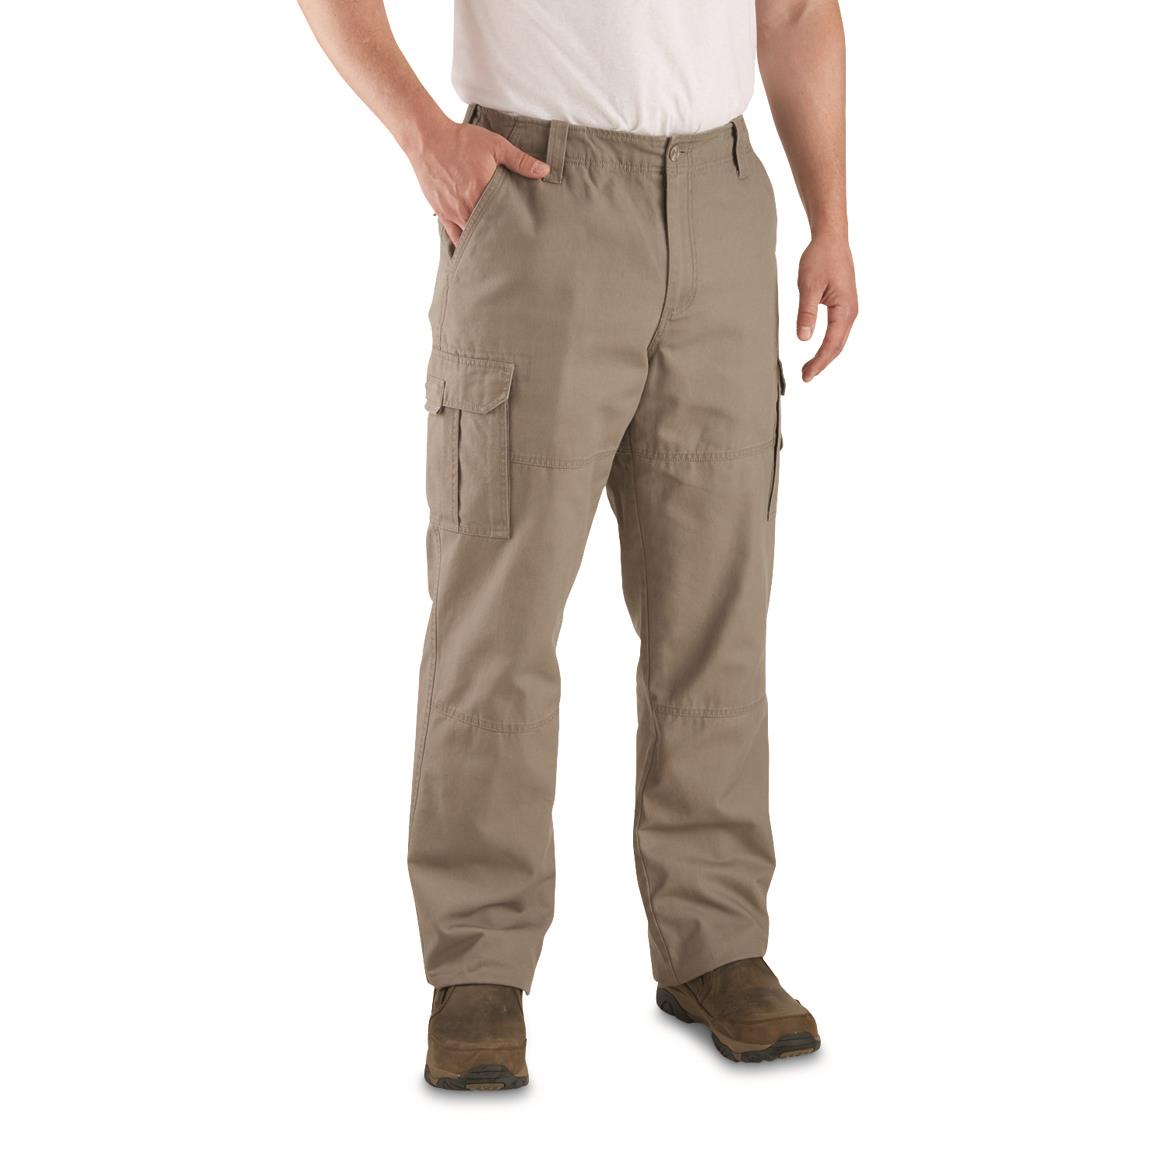 Guide Gear Men's Flannel-lined Cotton Cargo Pants, Driftwood